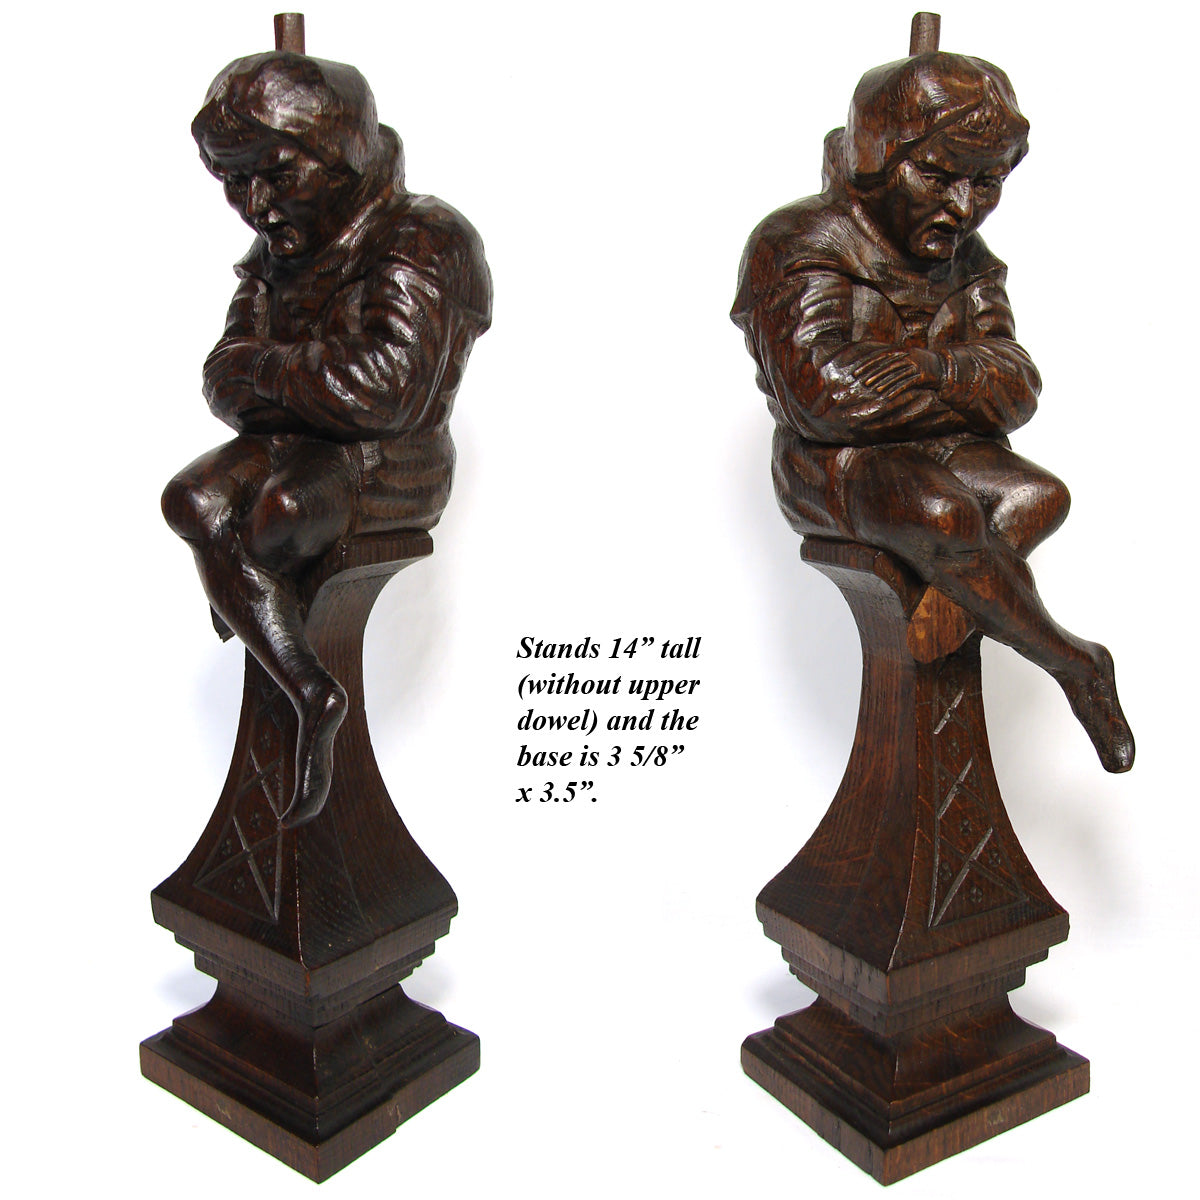 Antique French Carved 14” Furniture or Architectural Support, Pillar, Jester or Gnome Figure